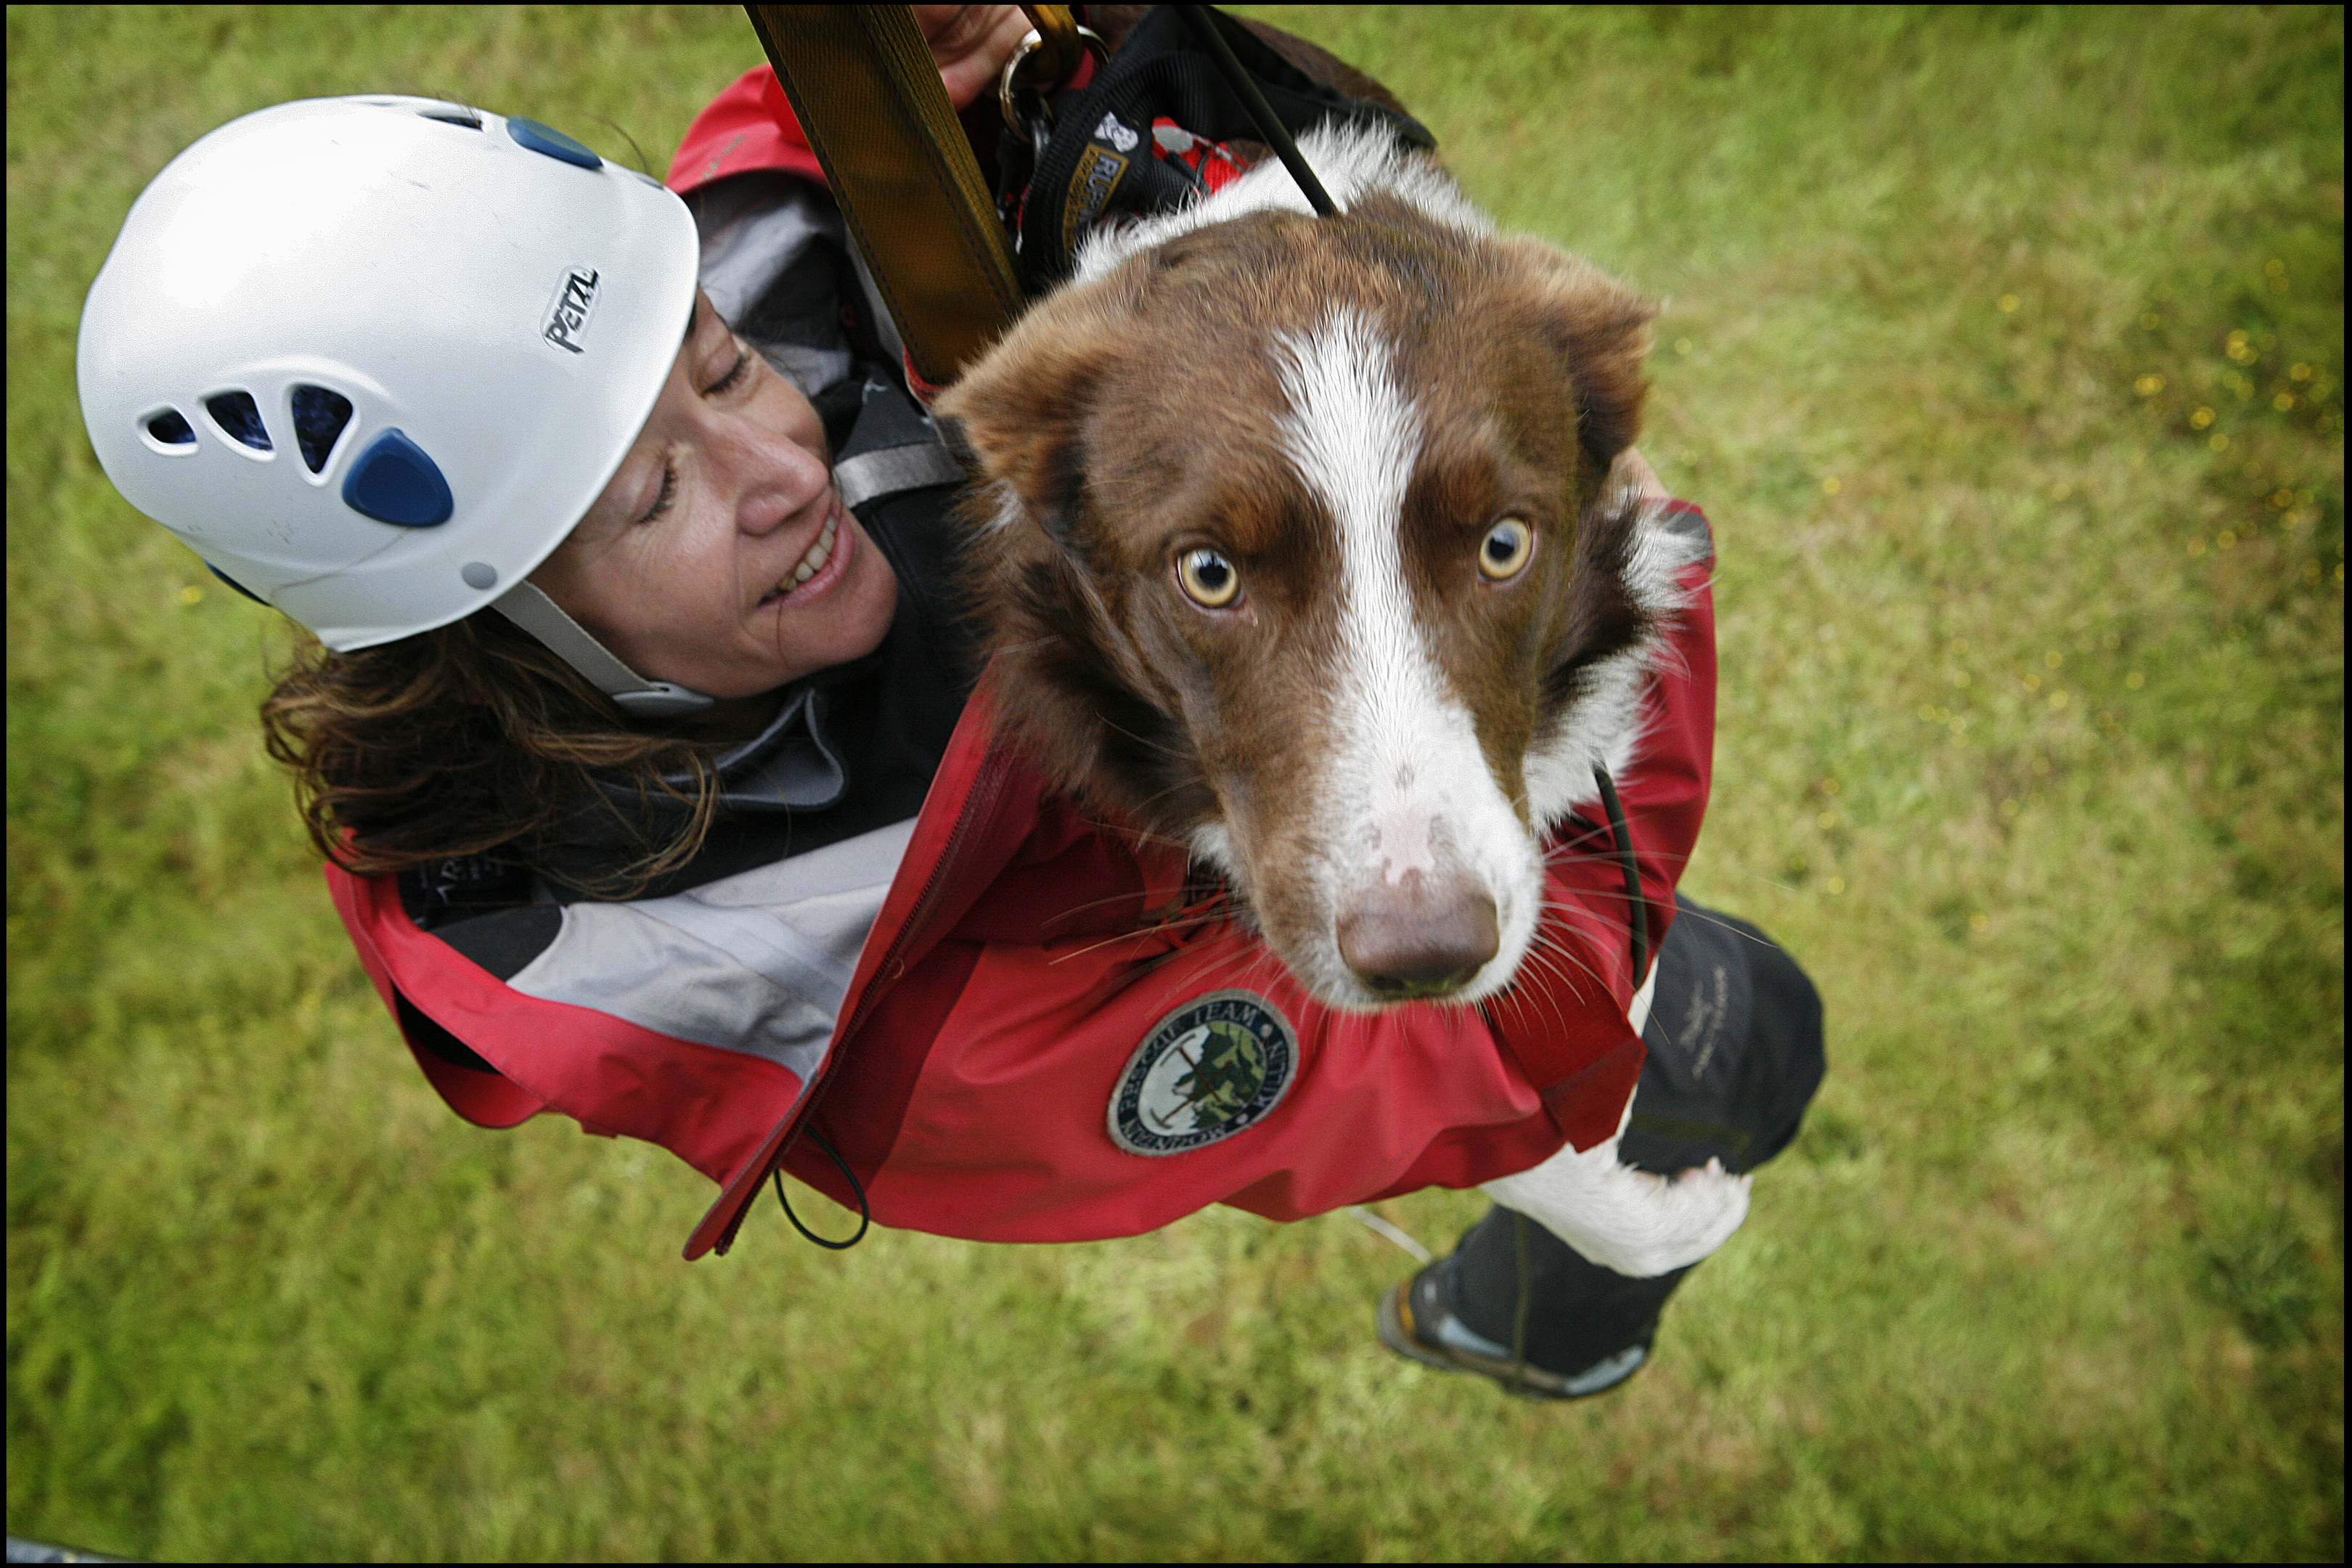 Search and Rescue Dog Association training.